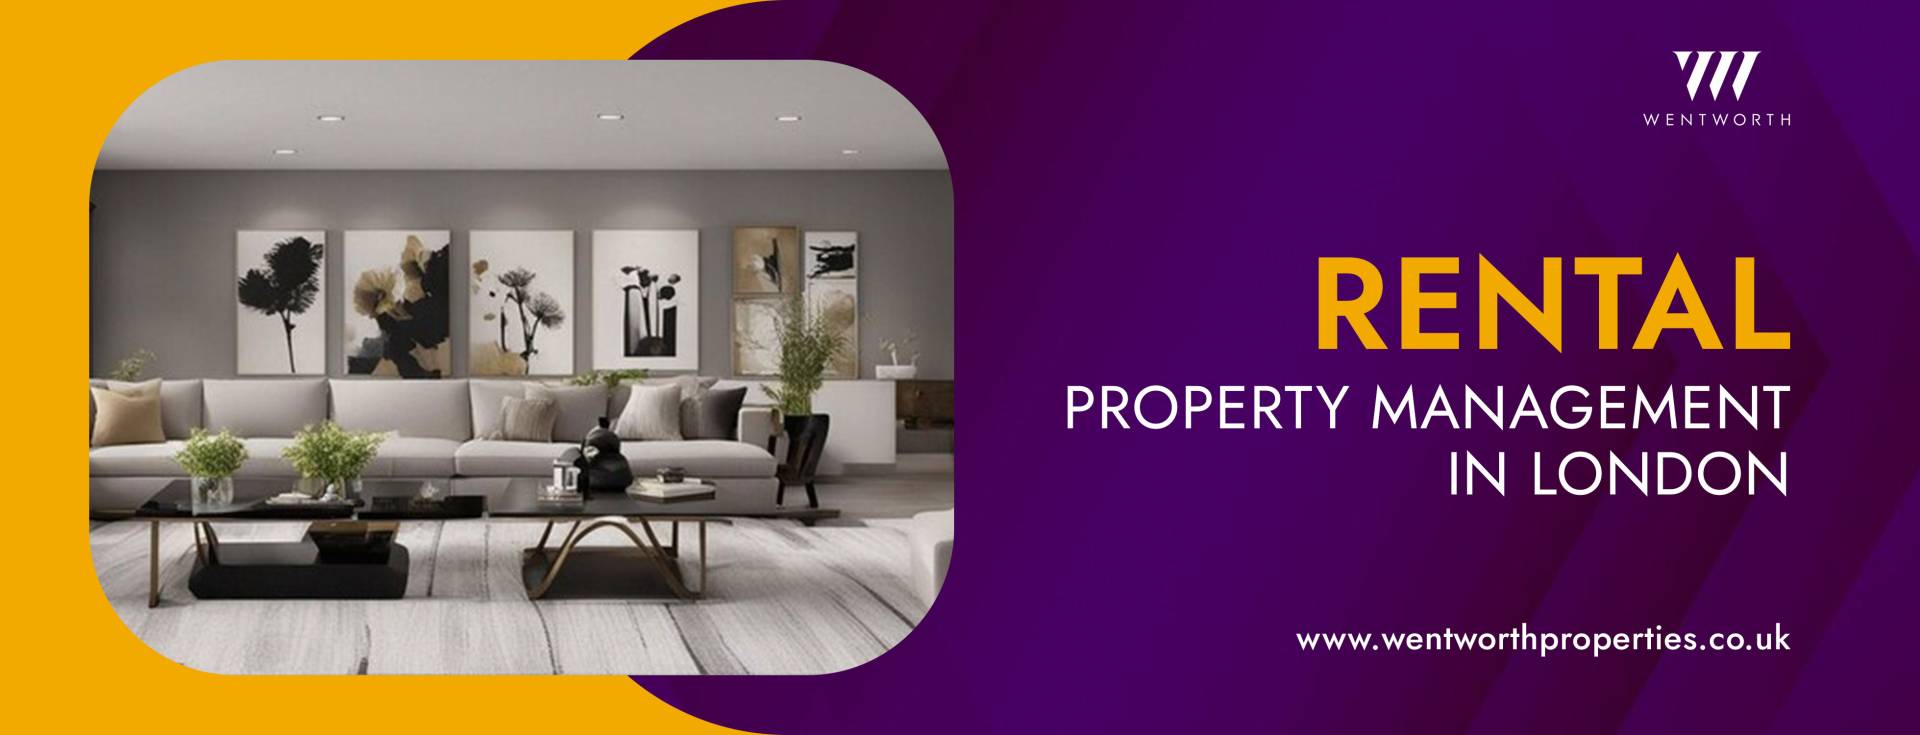 rental property management in london